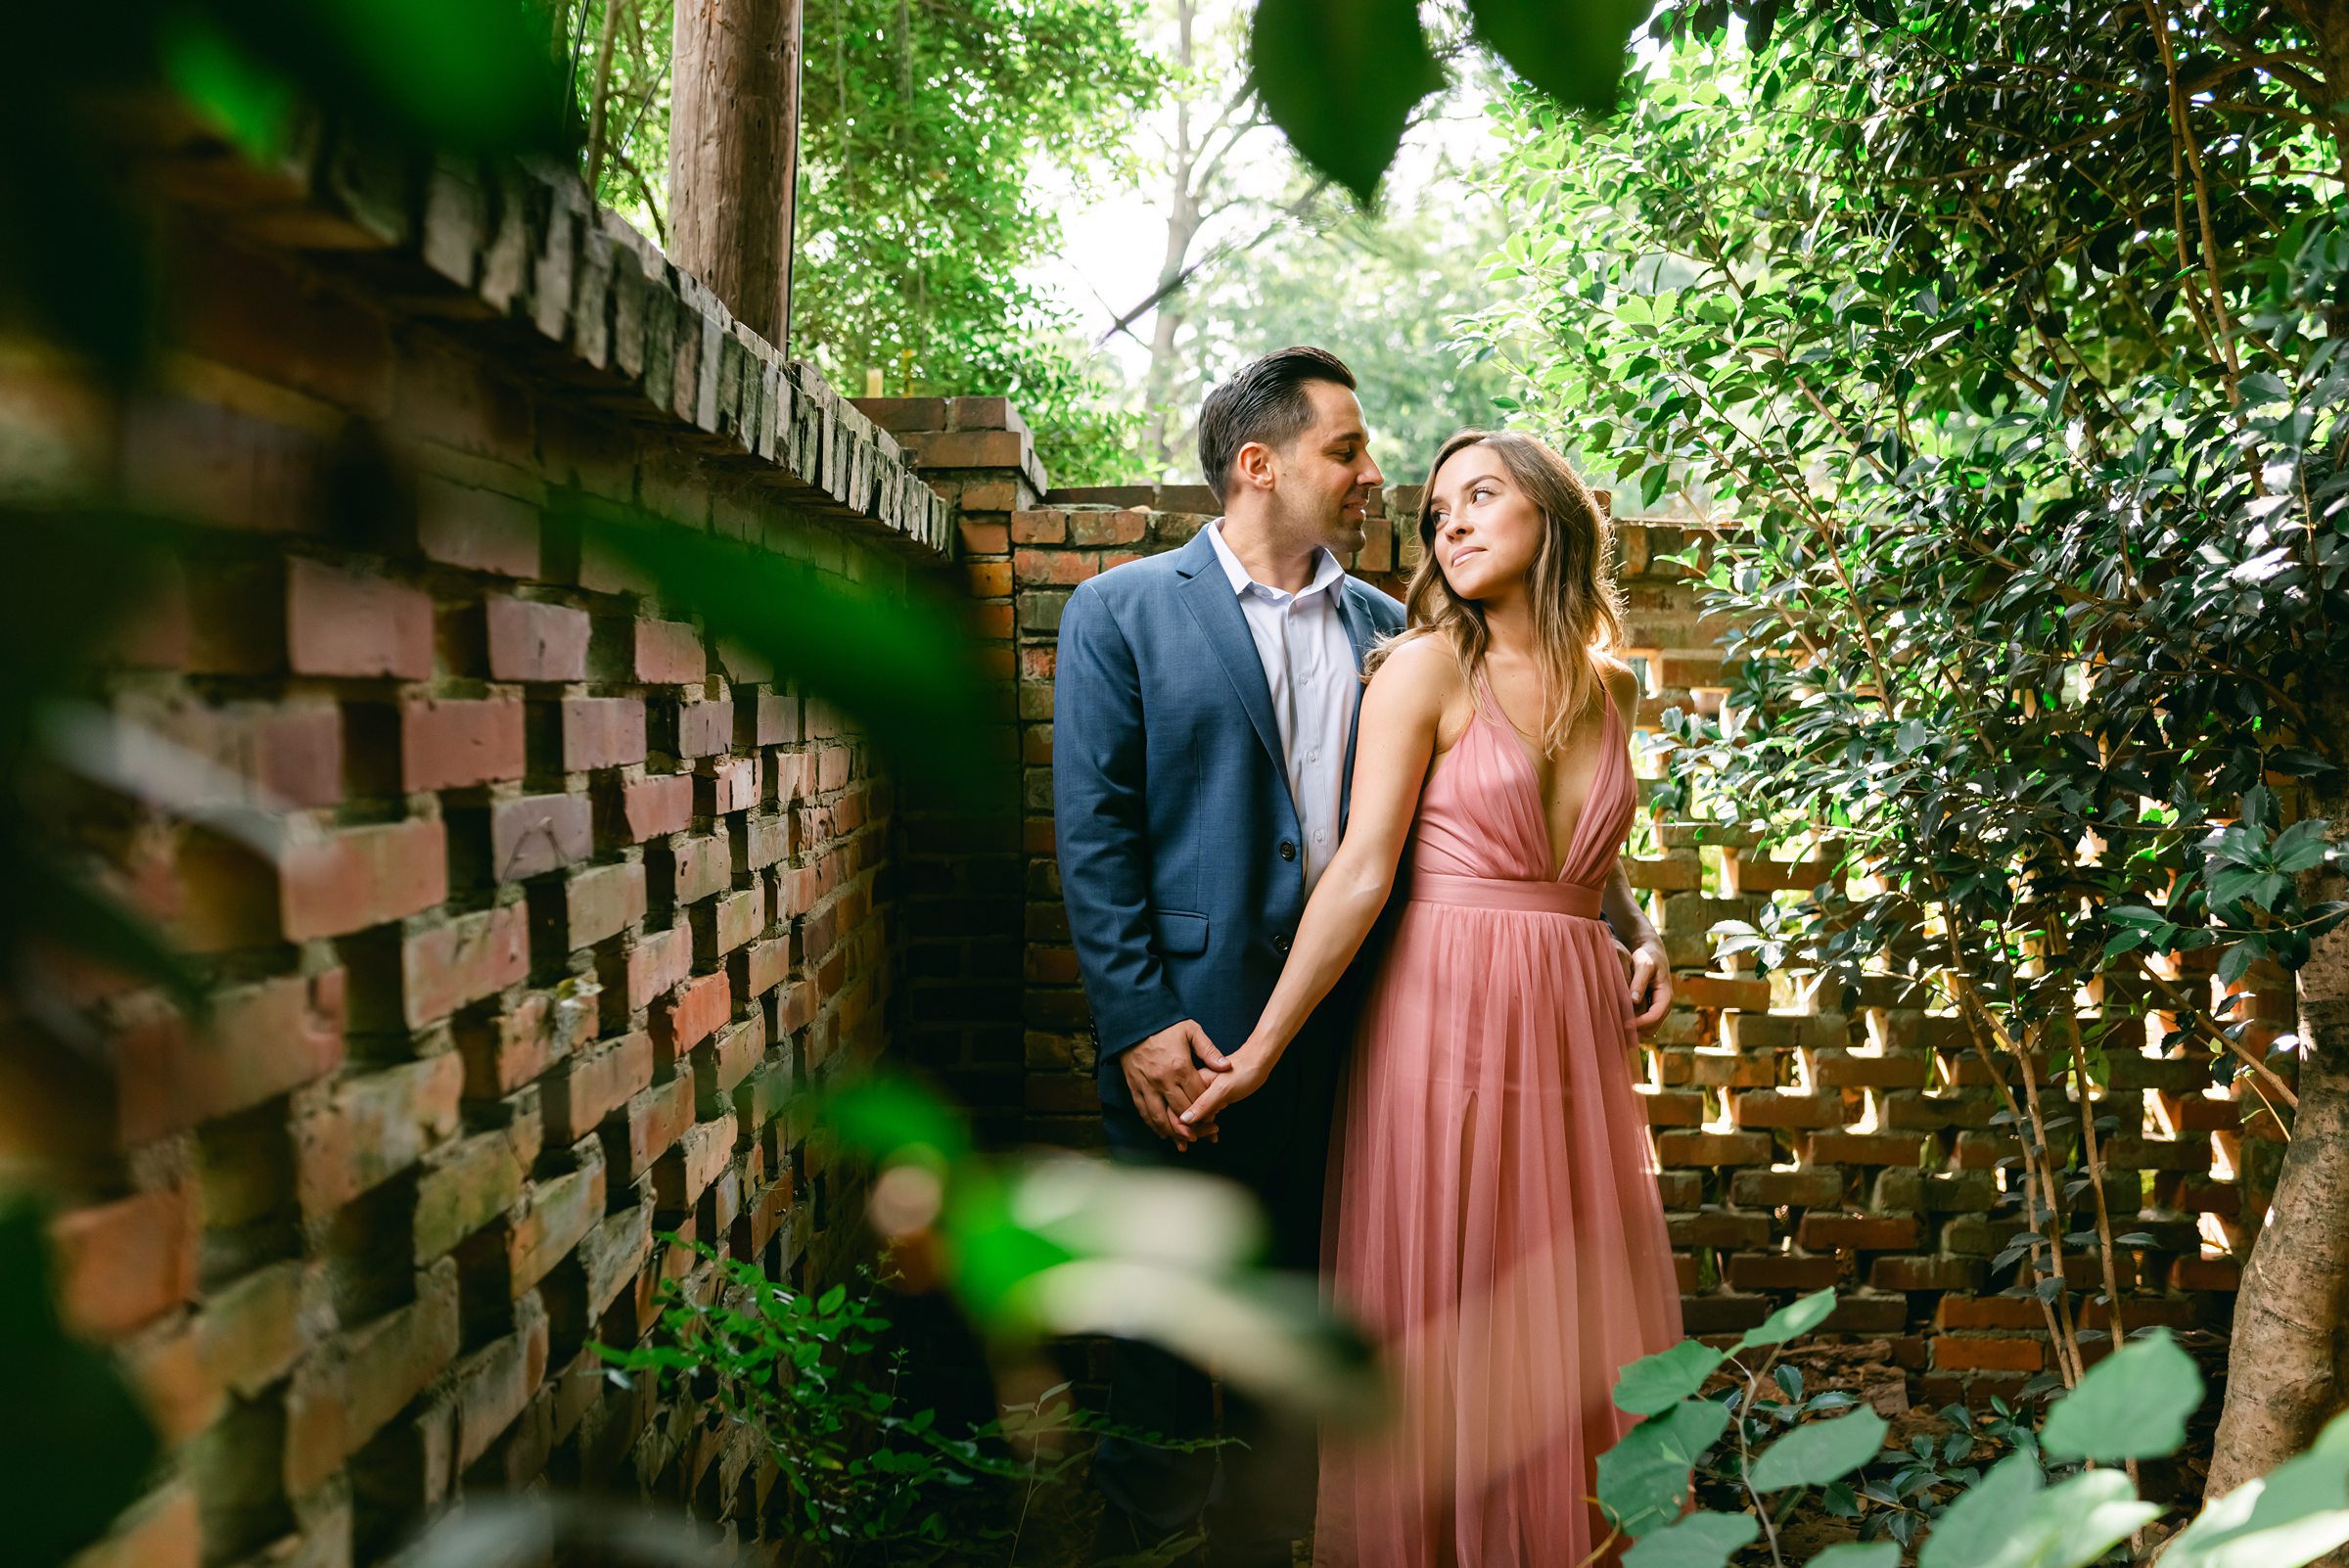 the couple looking at each other intensely during their wing haven garden engagement session